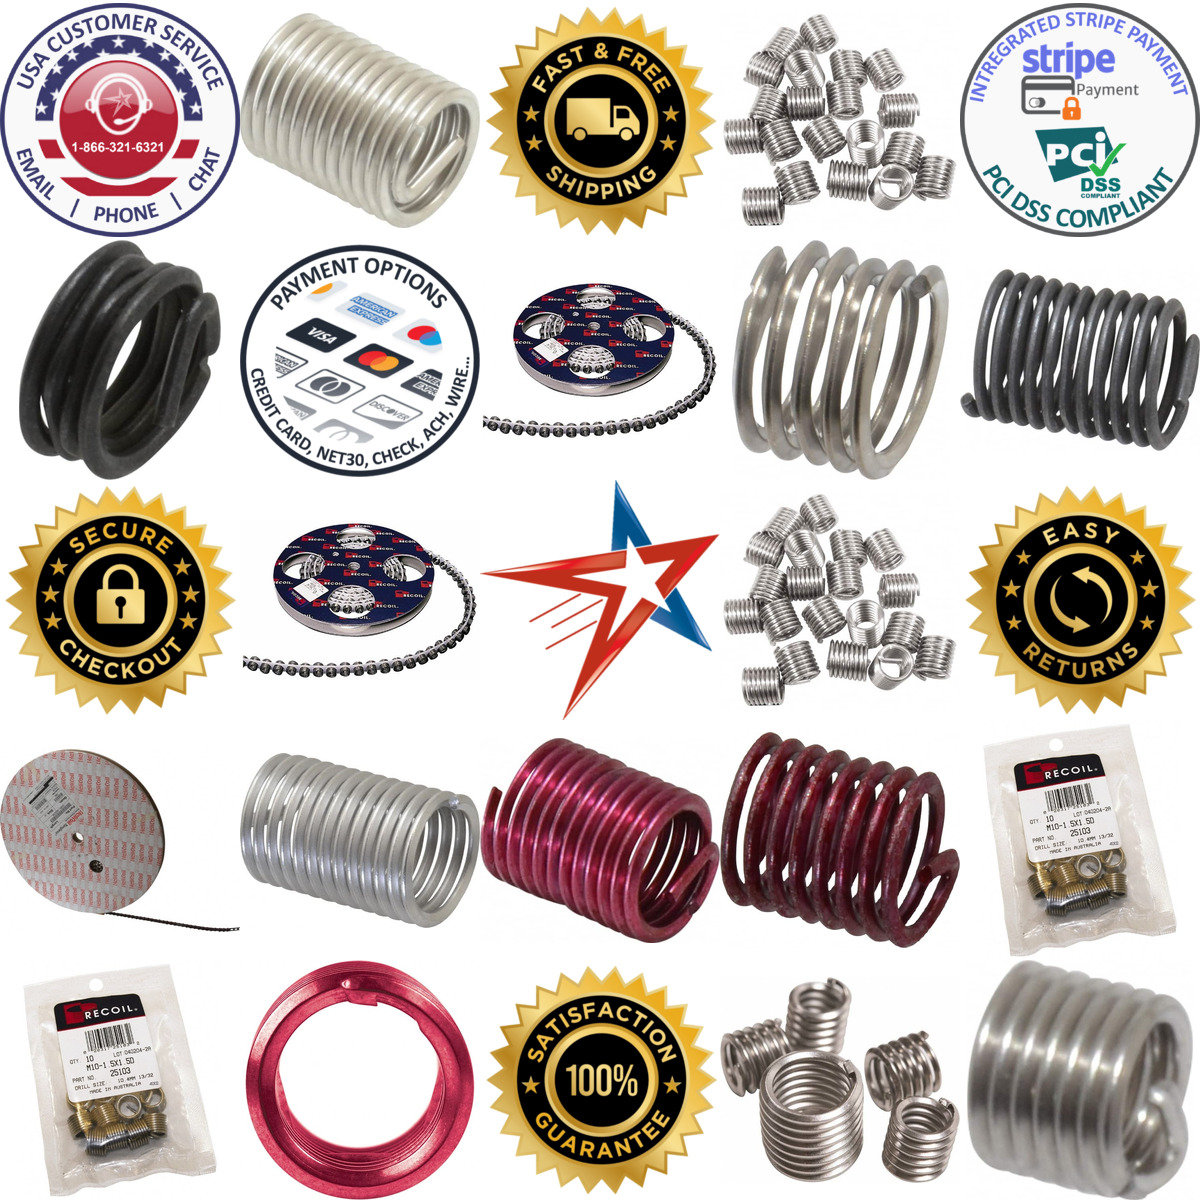 A selection of Helical Inserts products on GoVets